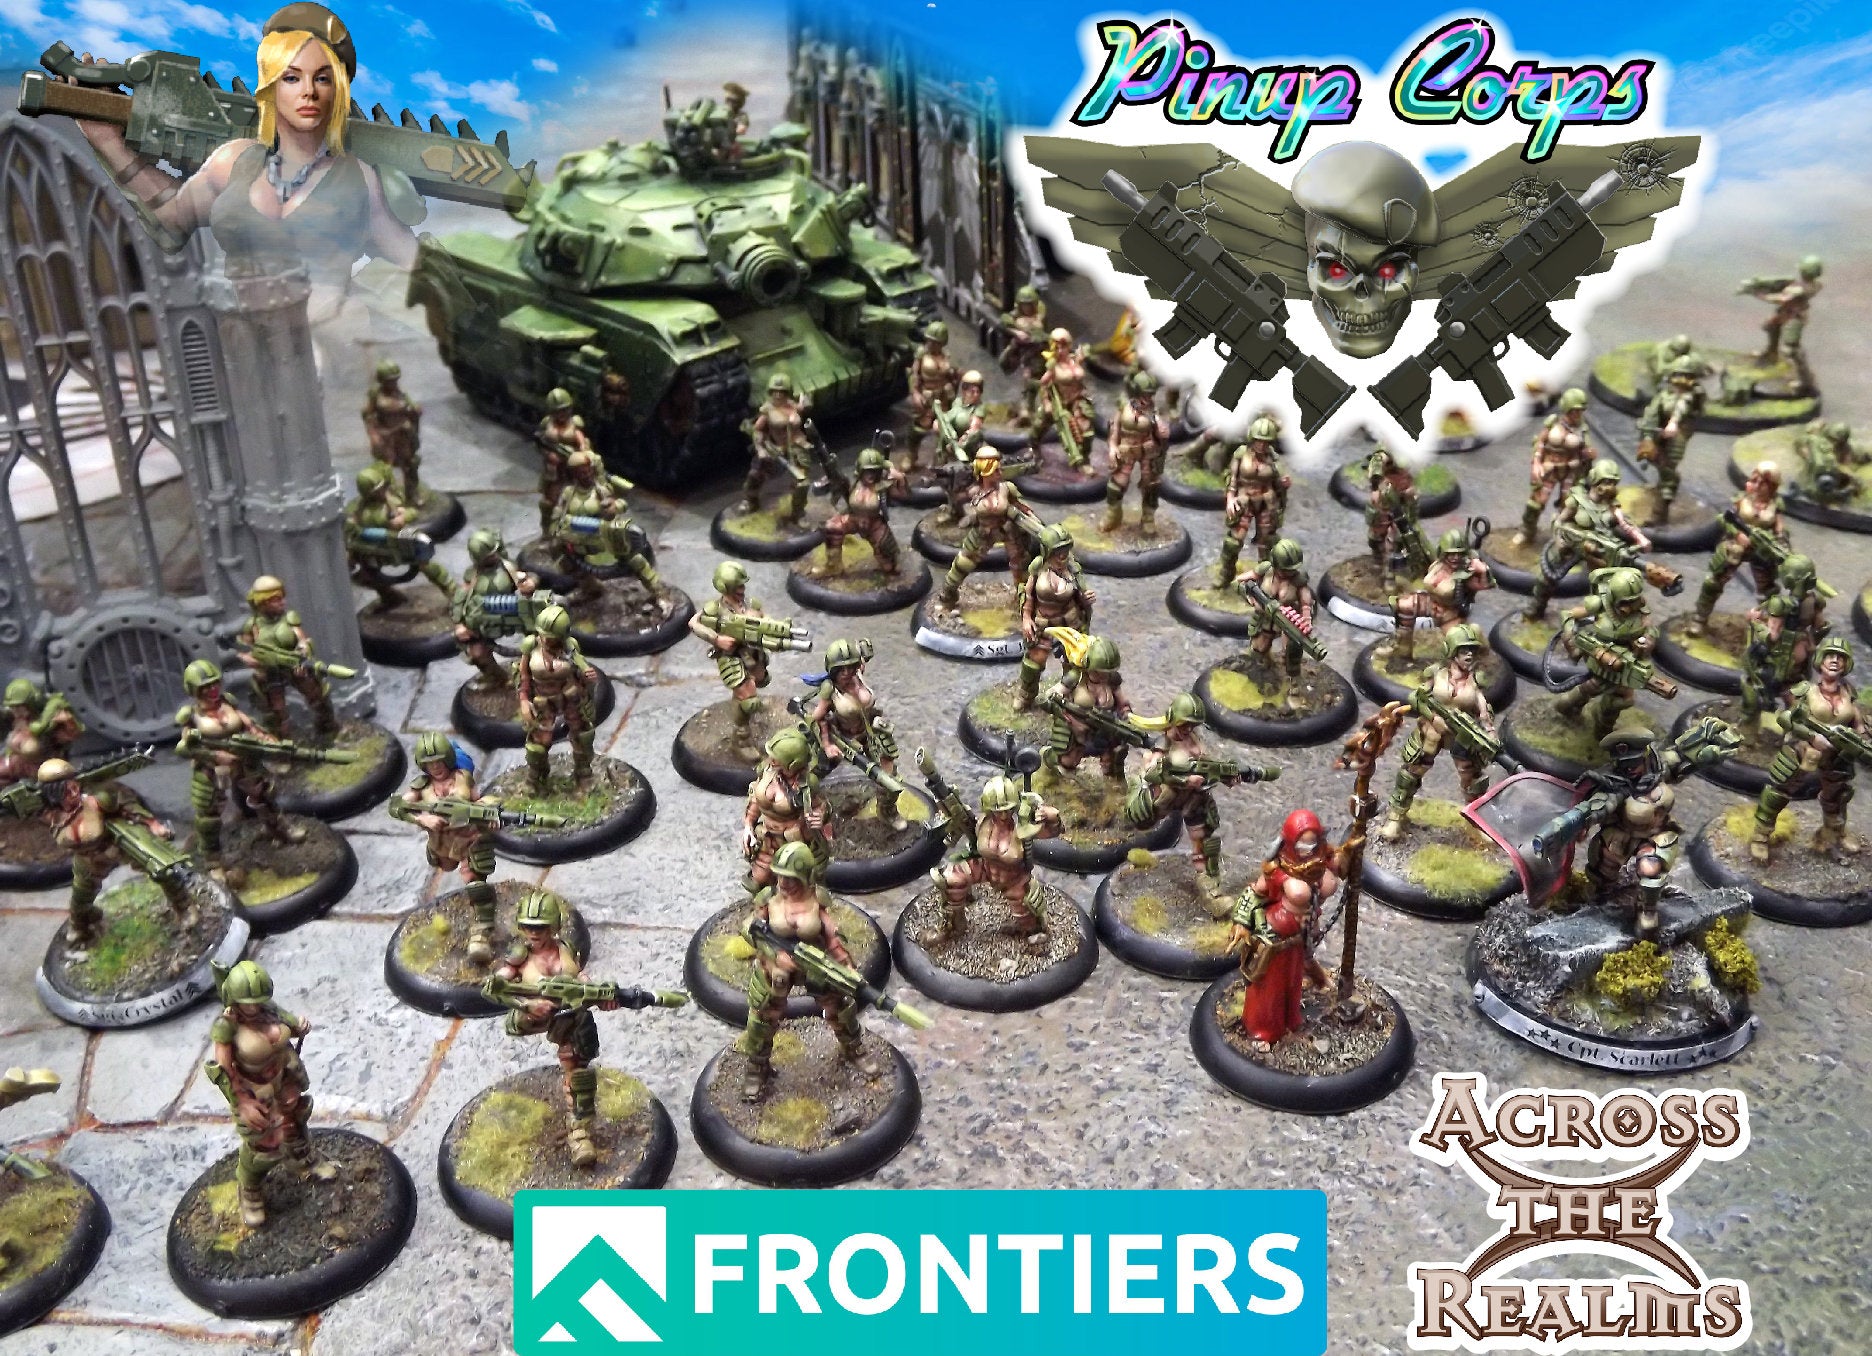 Pinup Corps Tank Commanders - Across the Realms | 28mm